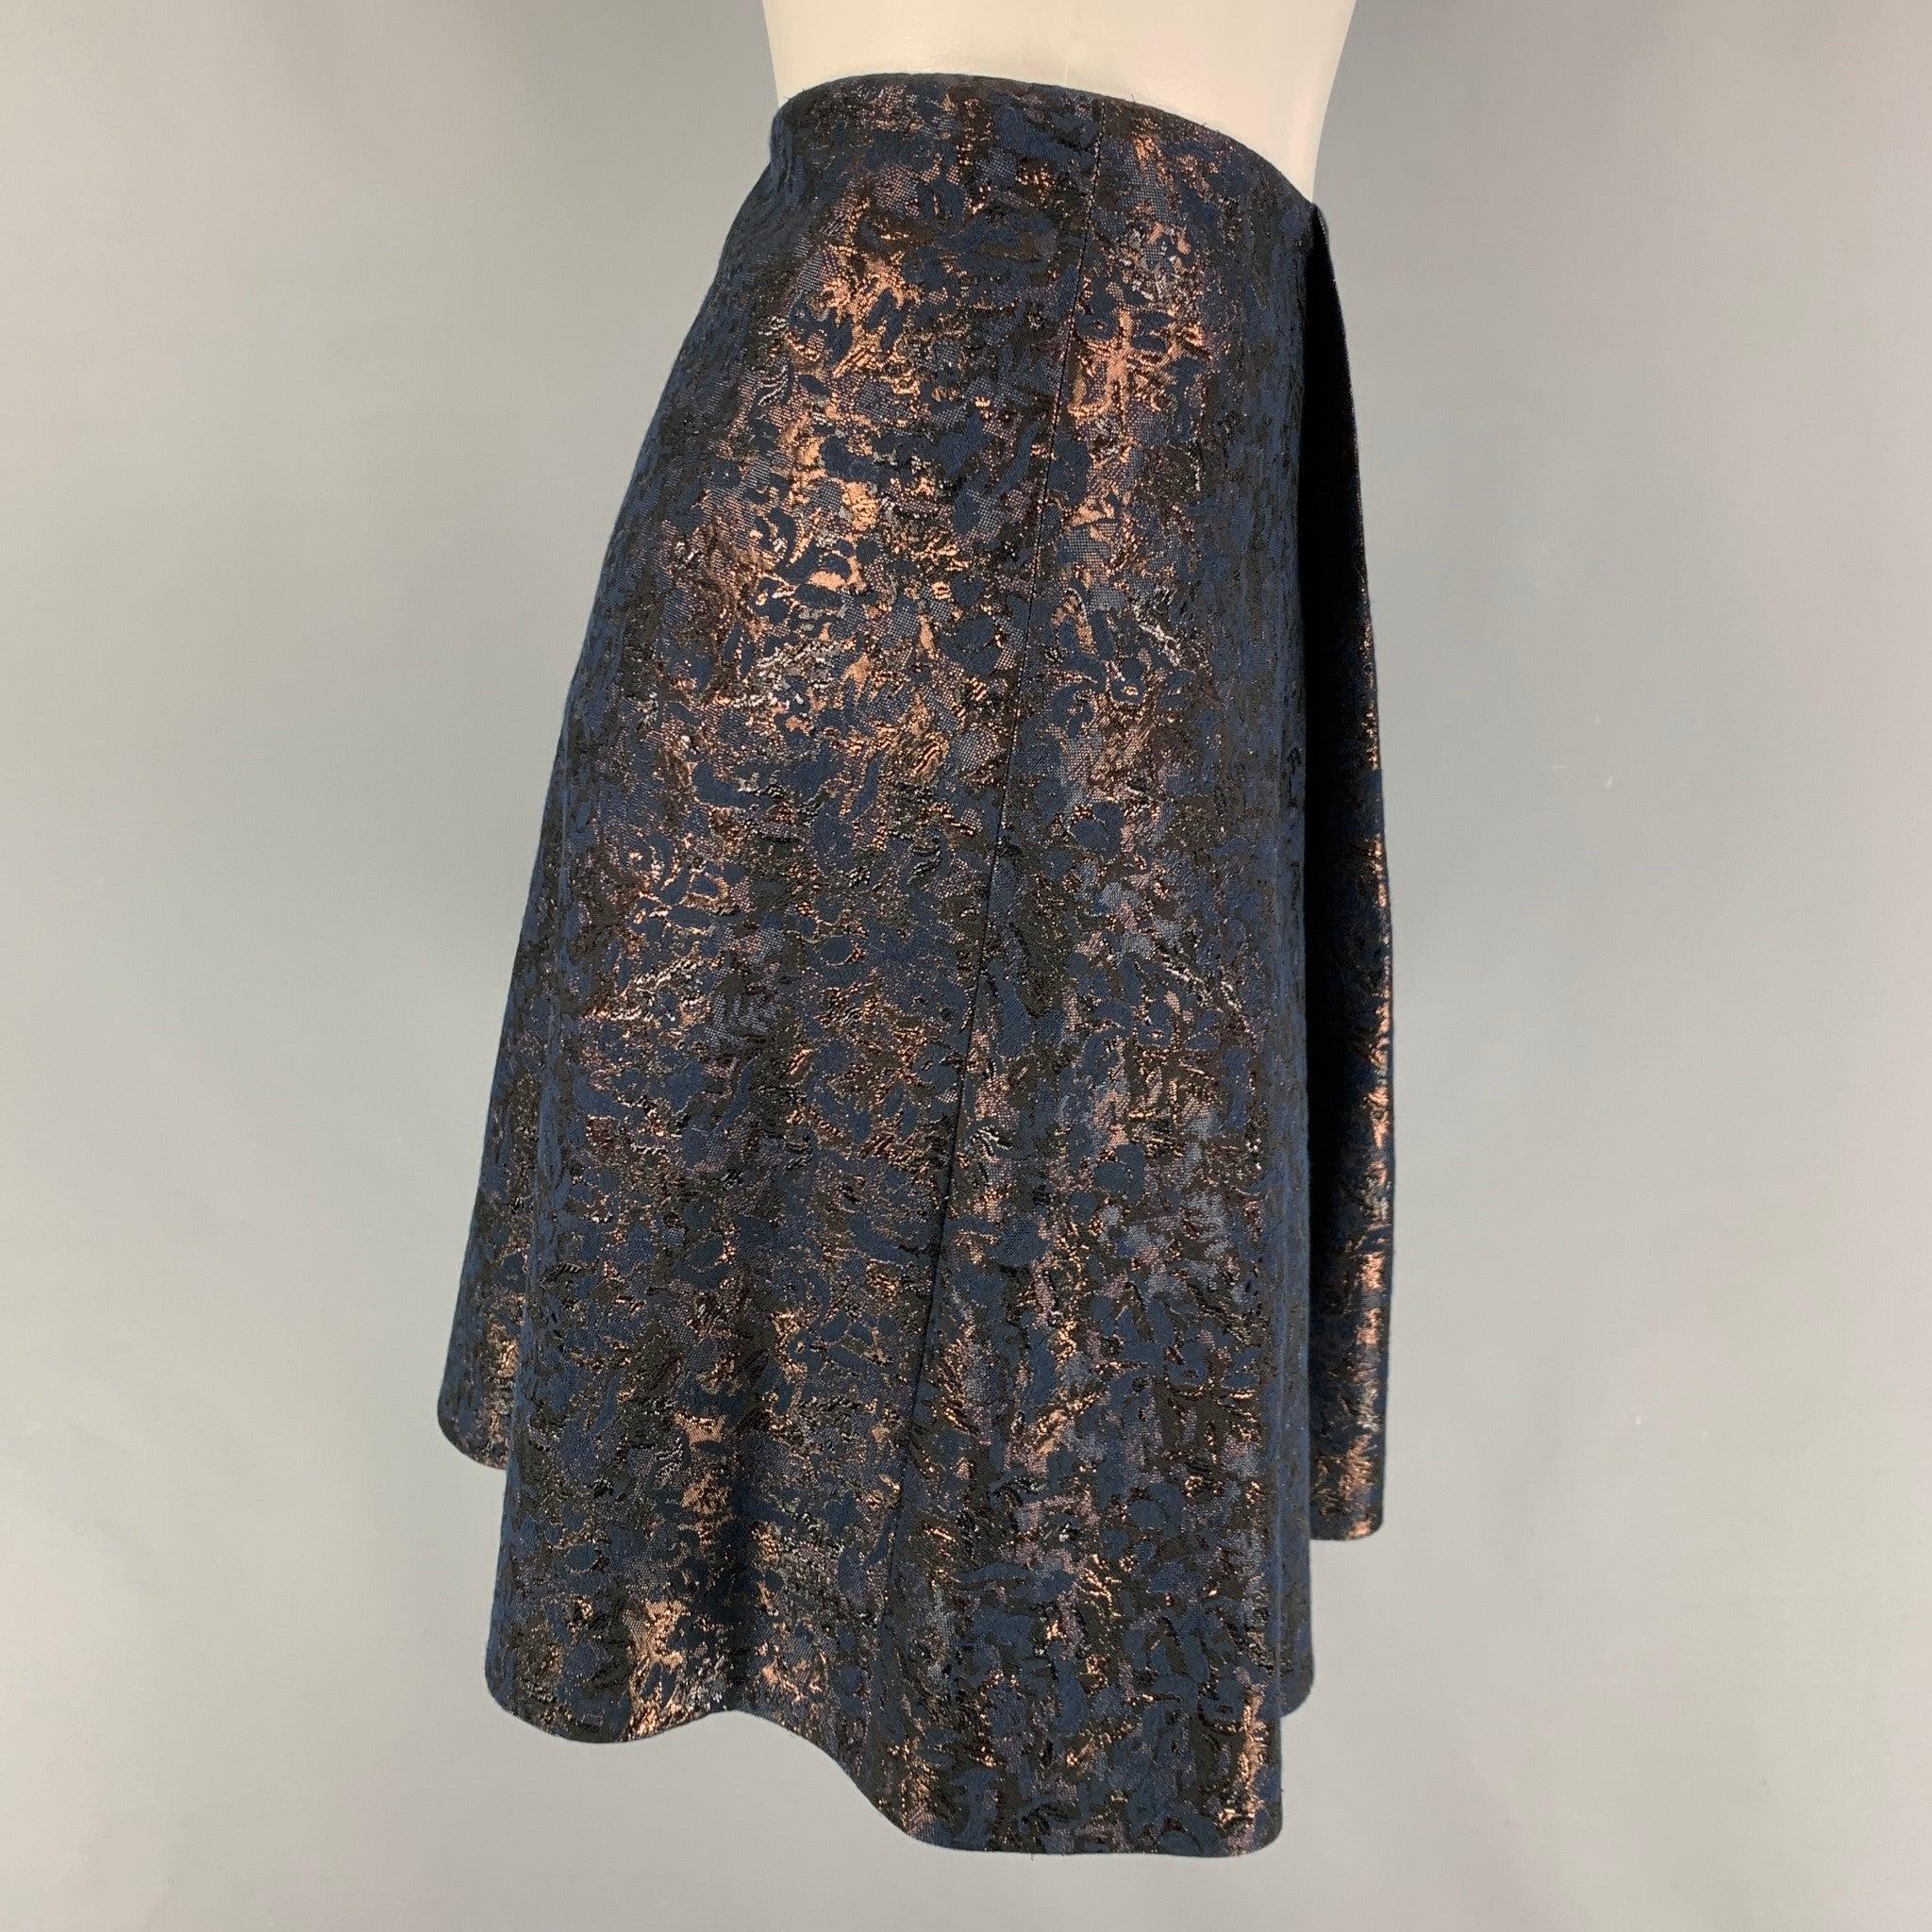 3.1 PHILLIP LIM skirt comes in a navy jacquard cotton featuring a wrap style and a side zipper closure.
Very Good
Pre-Owned Condition. 

Marked:   4 

Measurements: 
  Waist: 28 inches Hip: 38 inches  Length: 18 inches 
  
  
 
Reference: